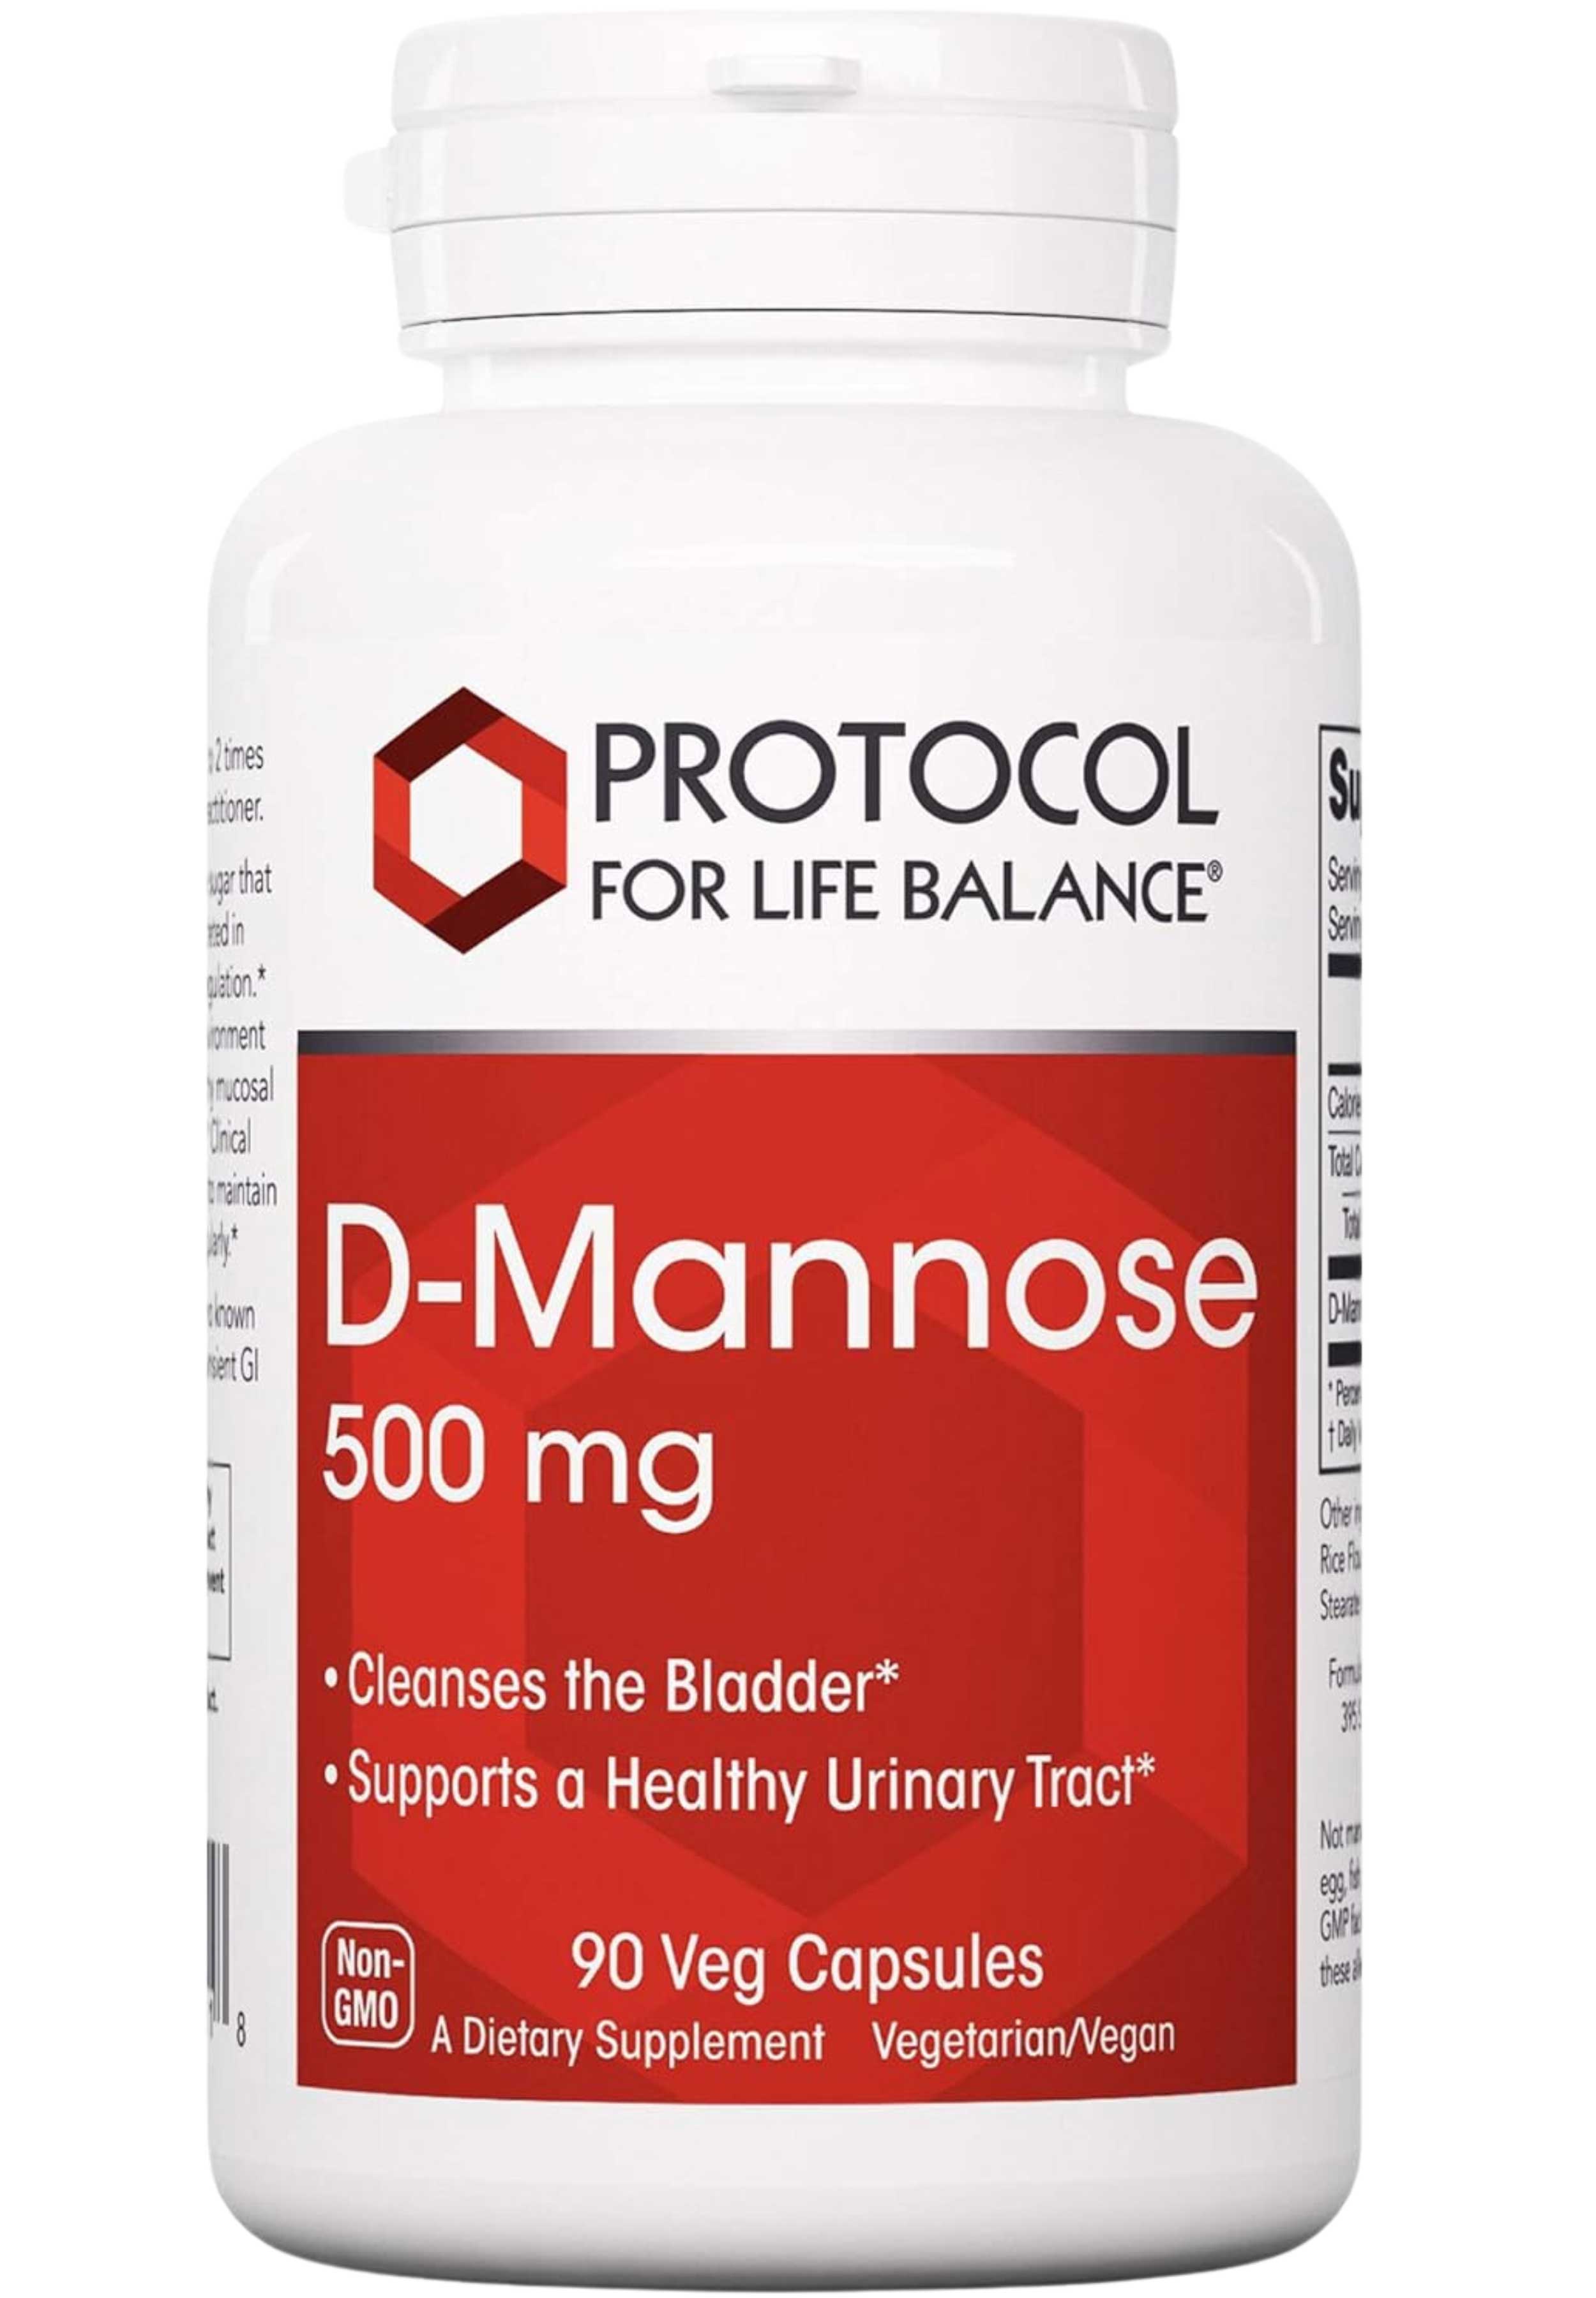 Protocol for Life Balance D-Mannose